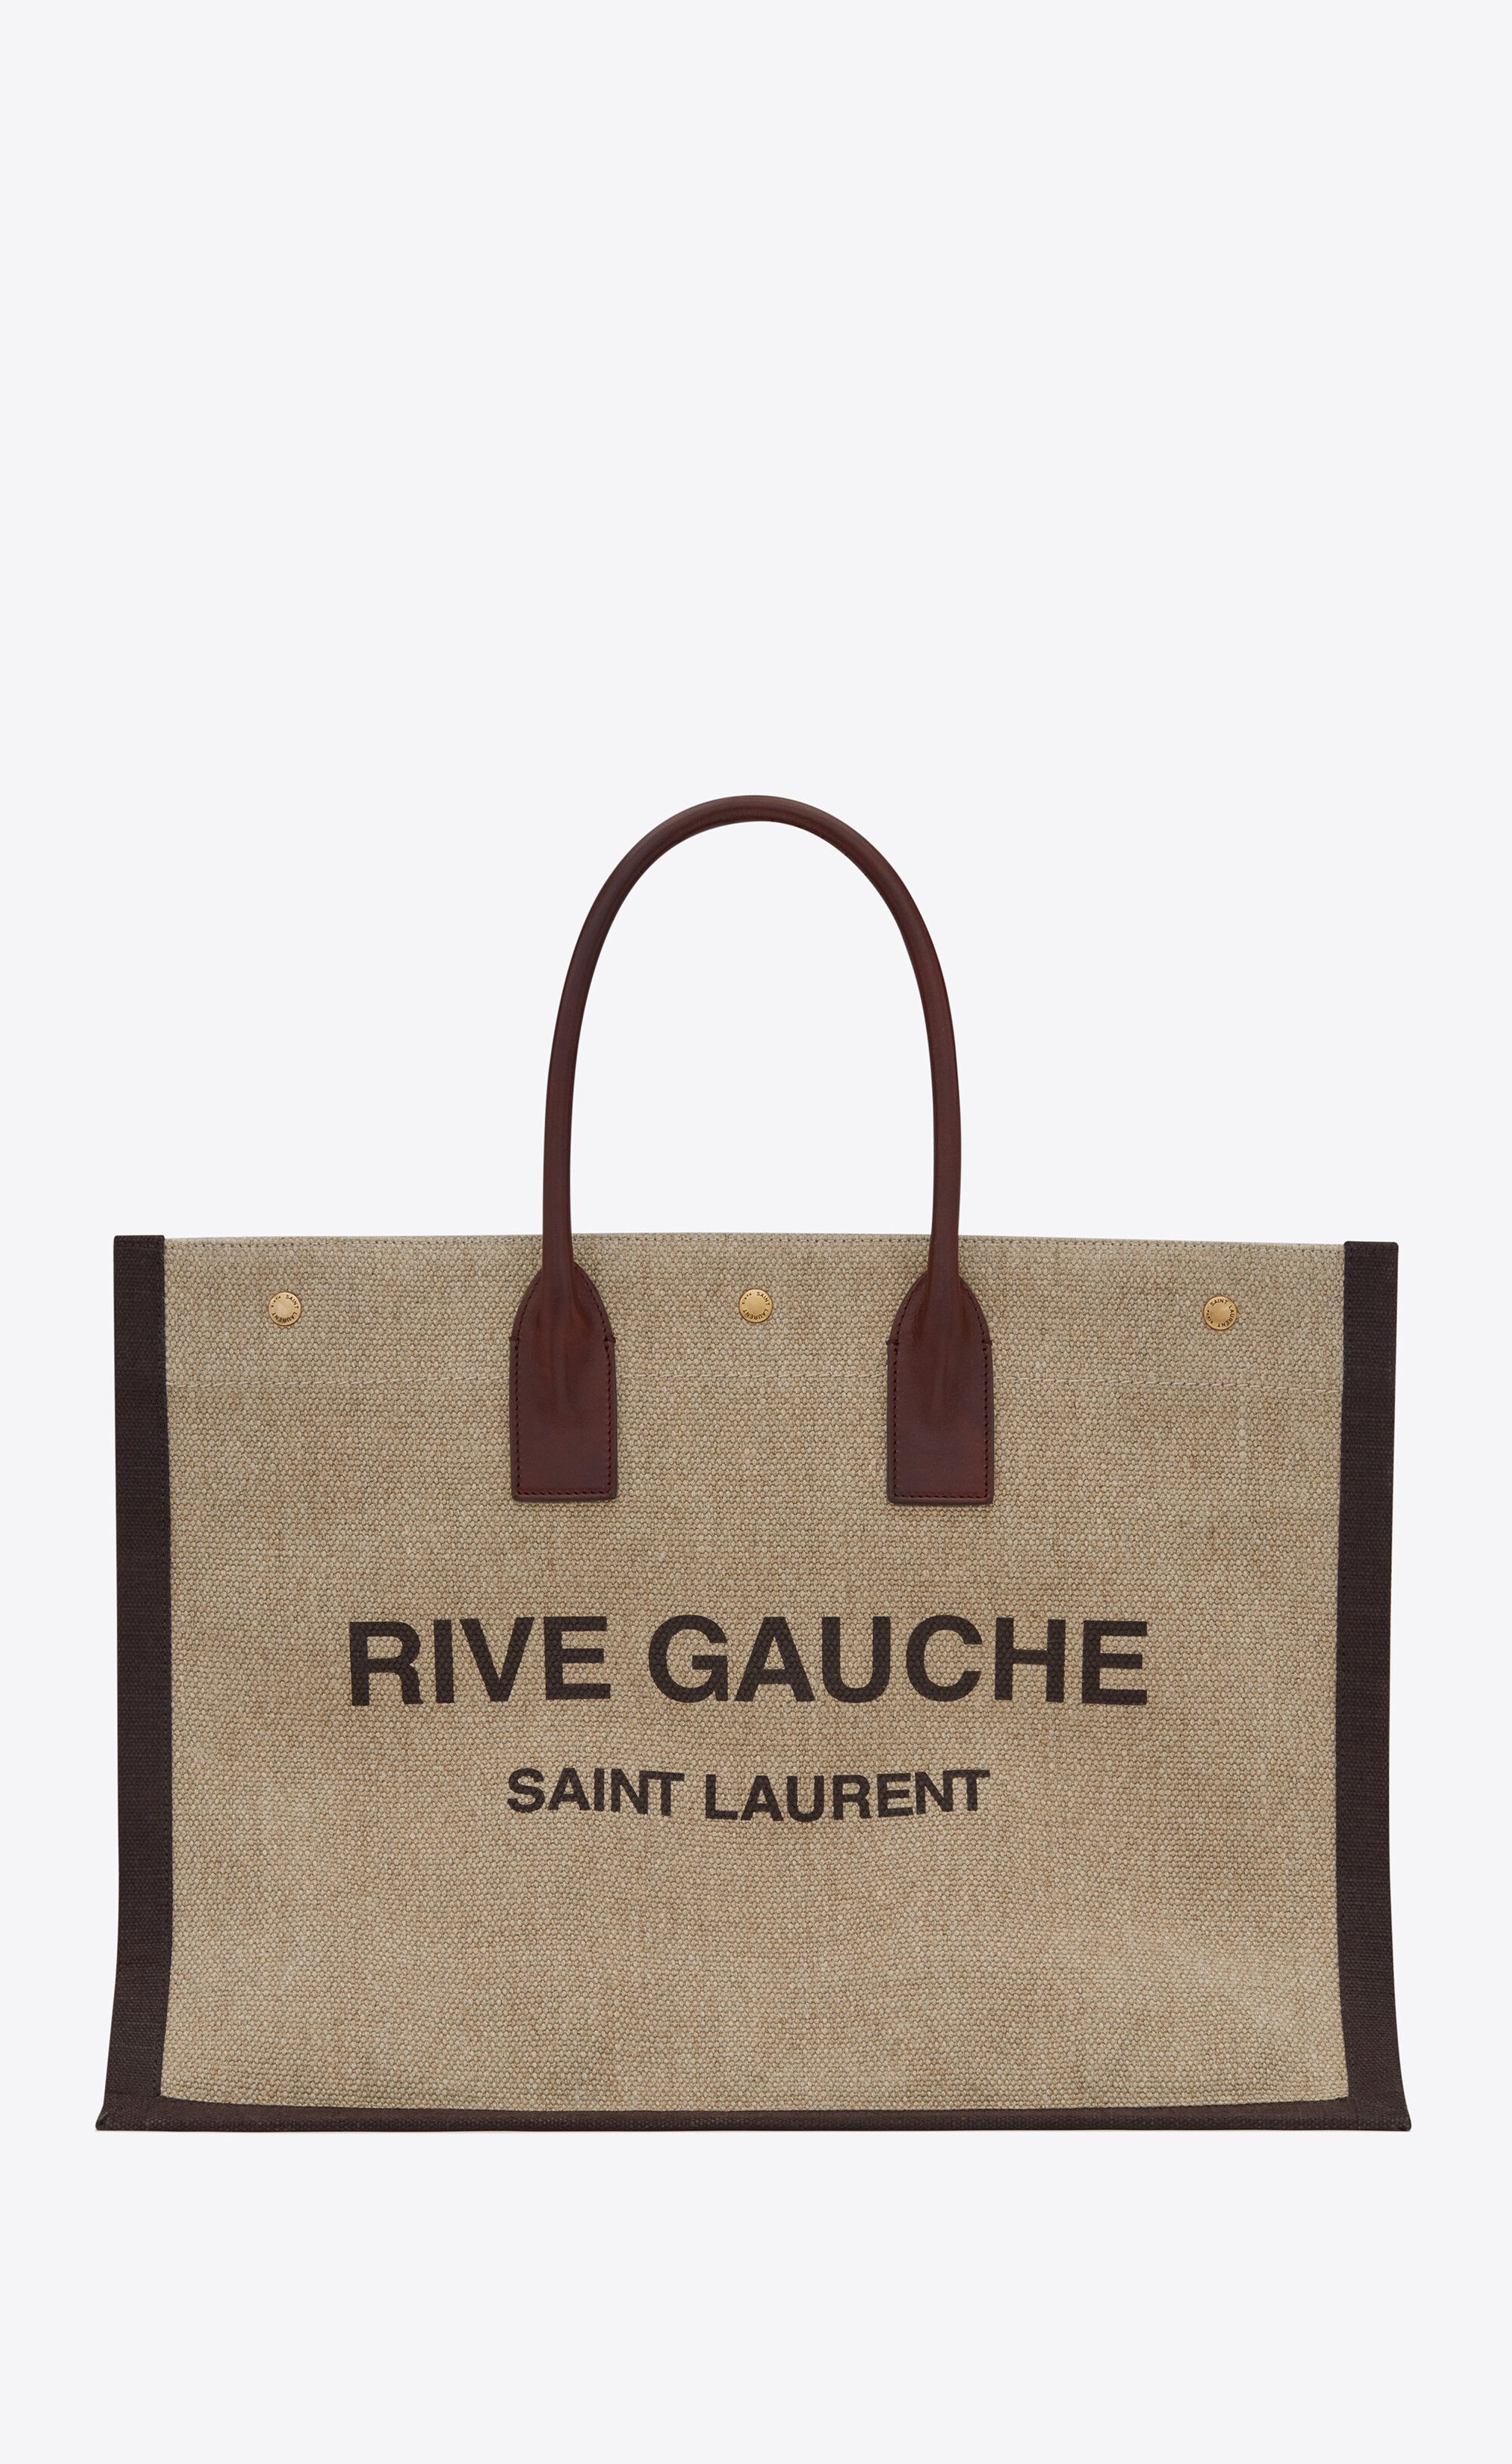 rive gauche tote bag in printed linen and leather | Saint Laurent Inc. (Global)